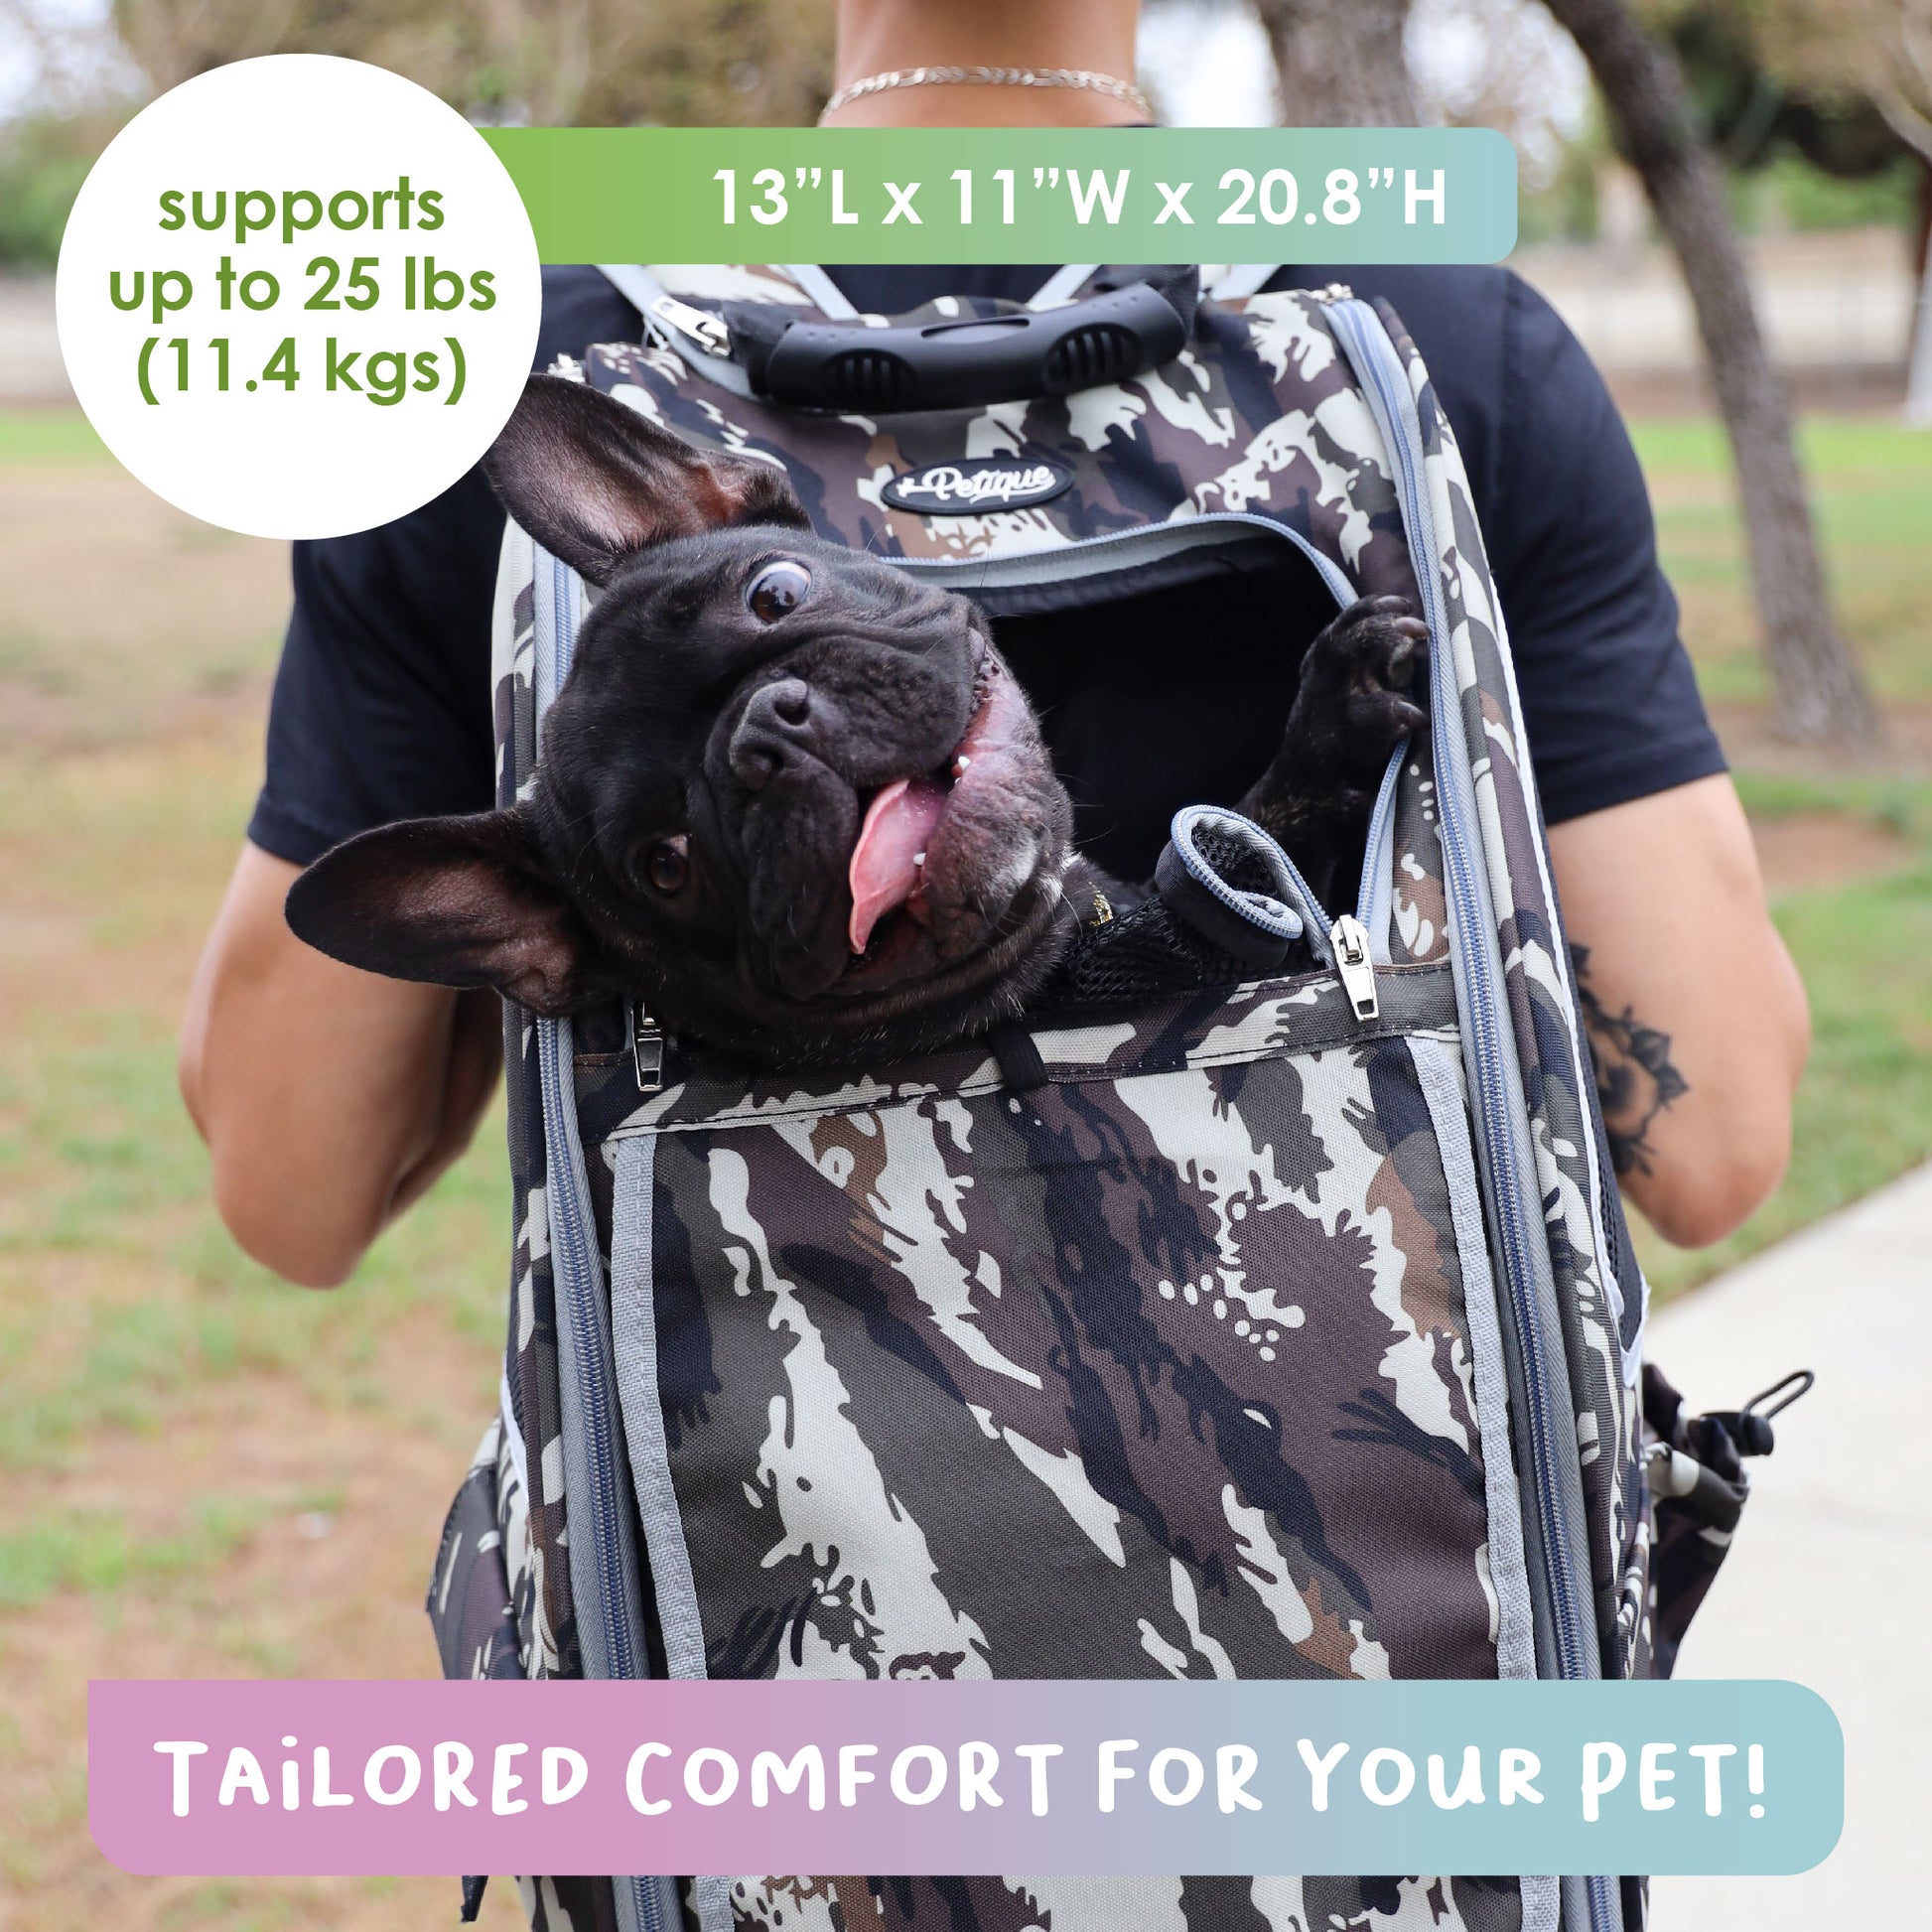 5-in-1 army camo pet carrier with frenchie